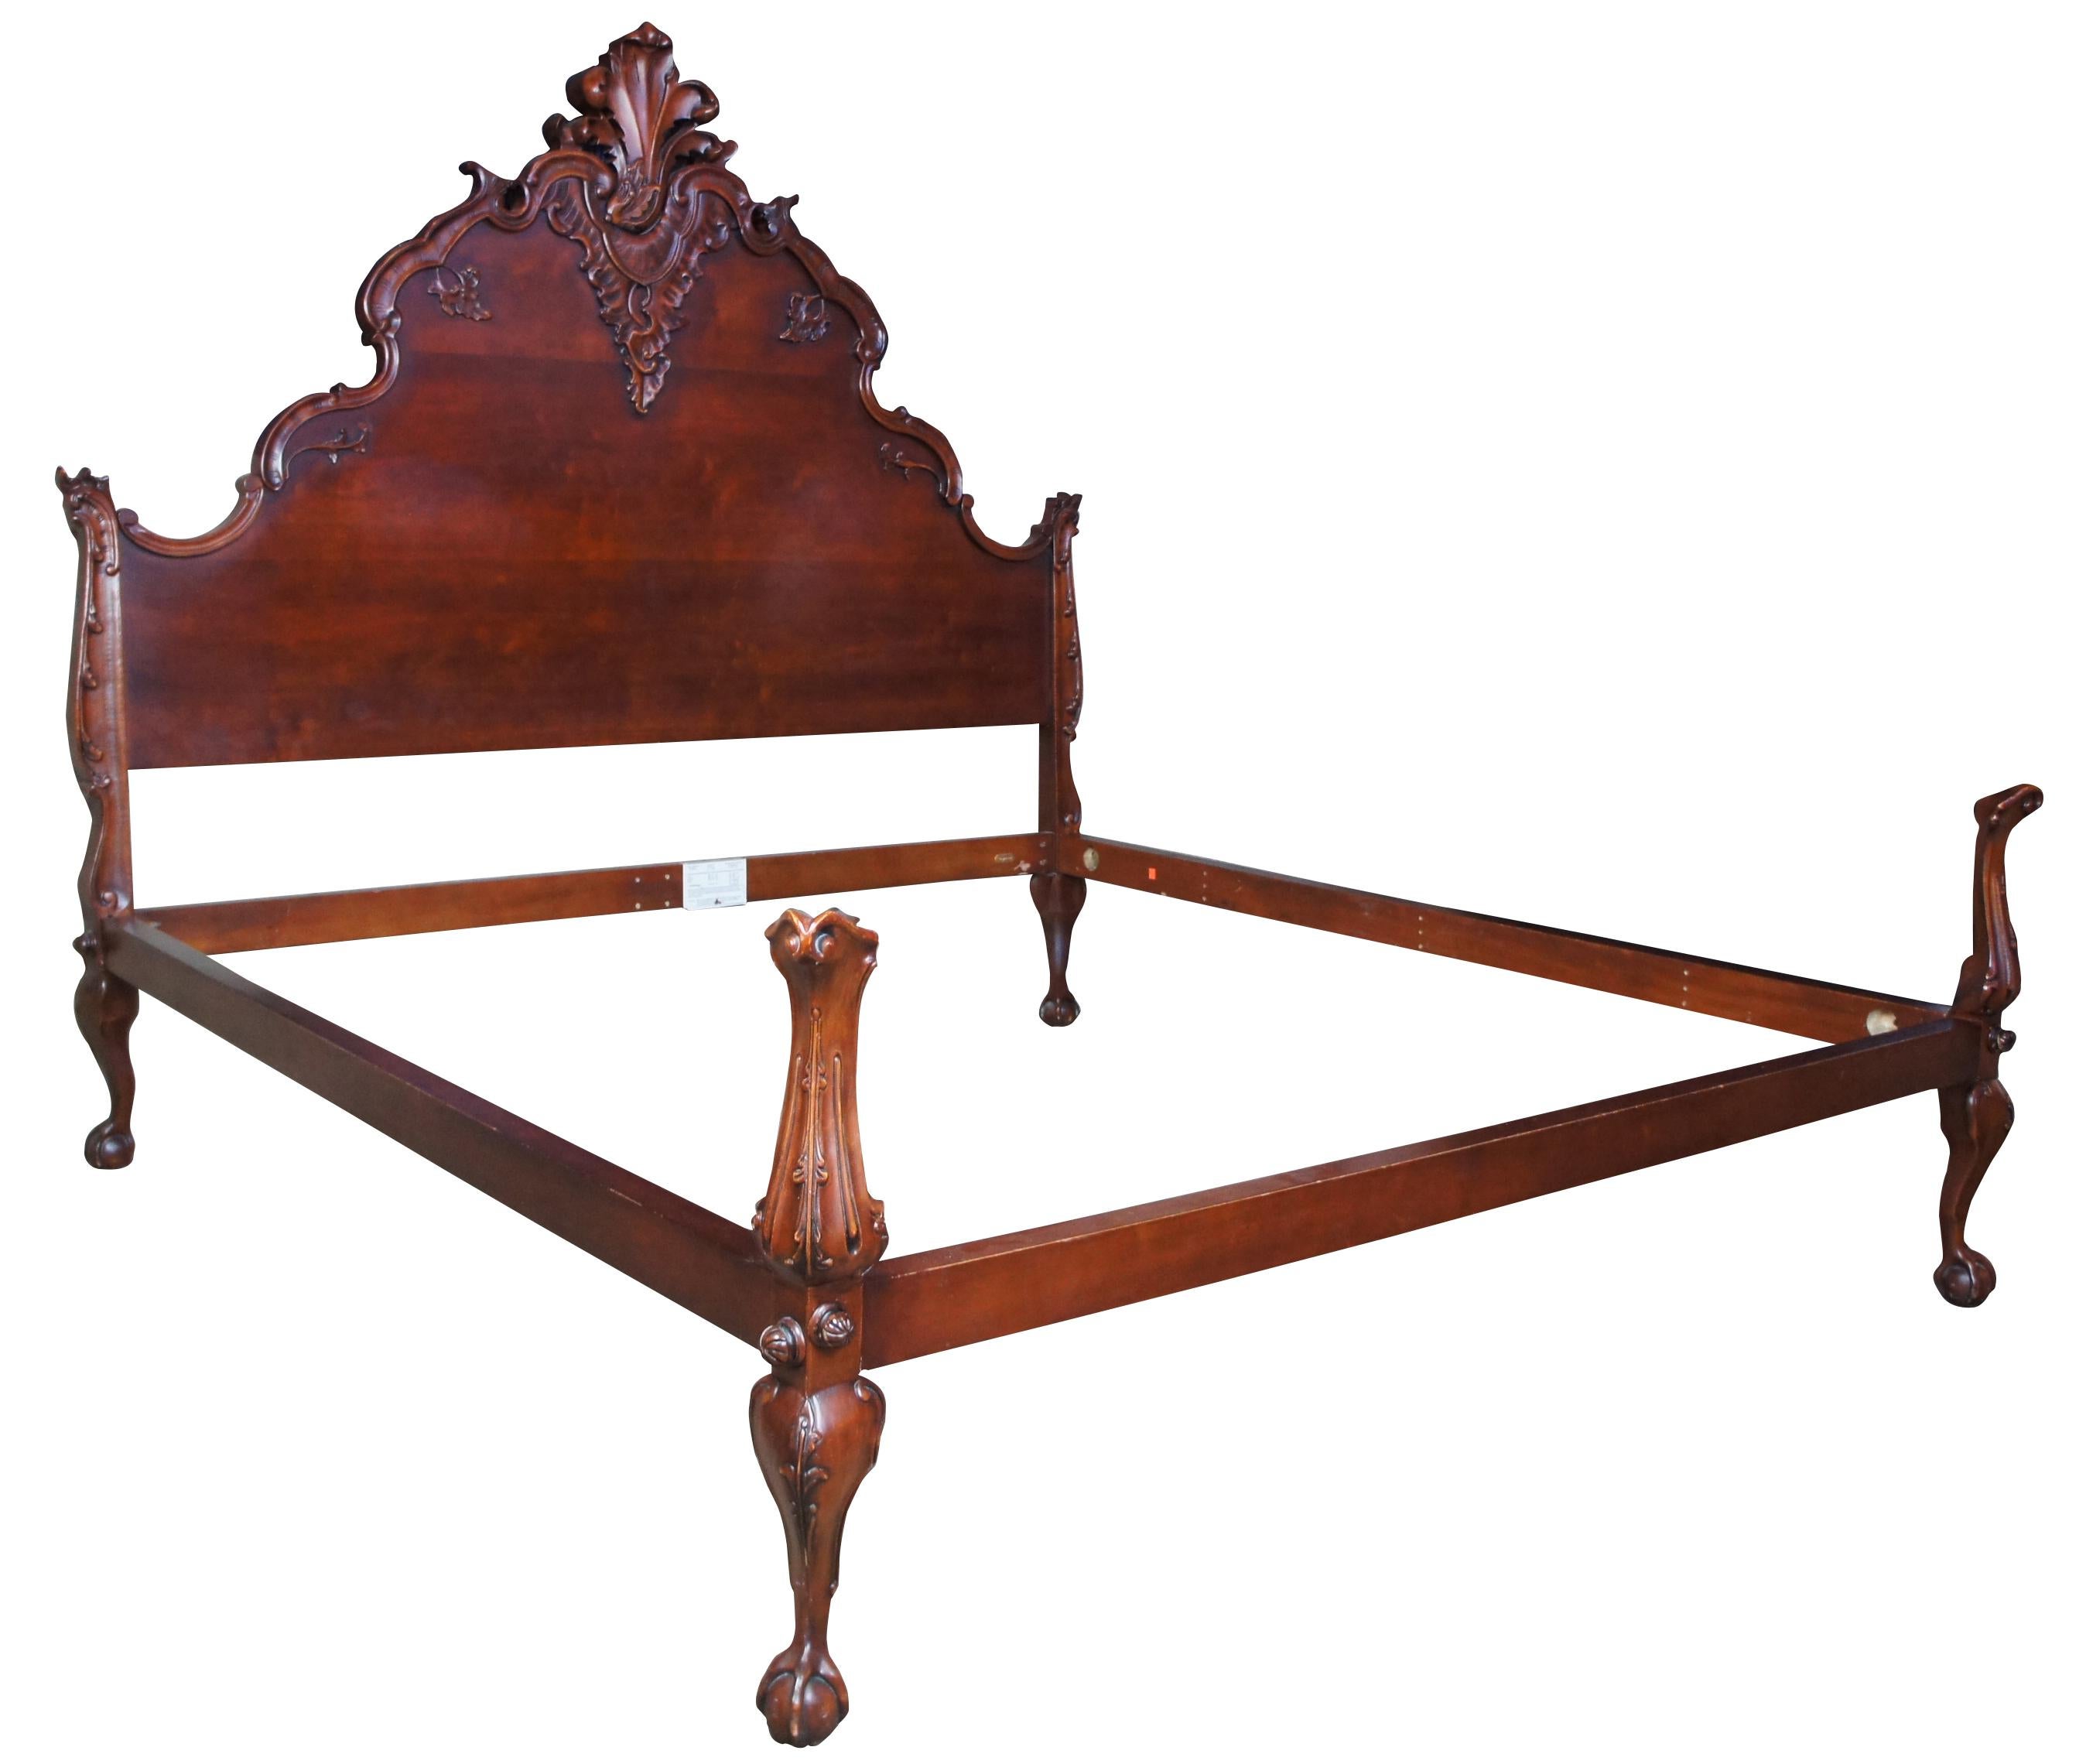 Henredon for Ralph Lauren king size mahogany bed. Influenced by Chippendale and Baroque styling with a dramatic arched headboard featuring ornately scalloped design. Includes ball and claw feet.
  